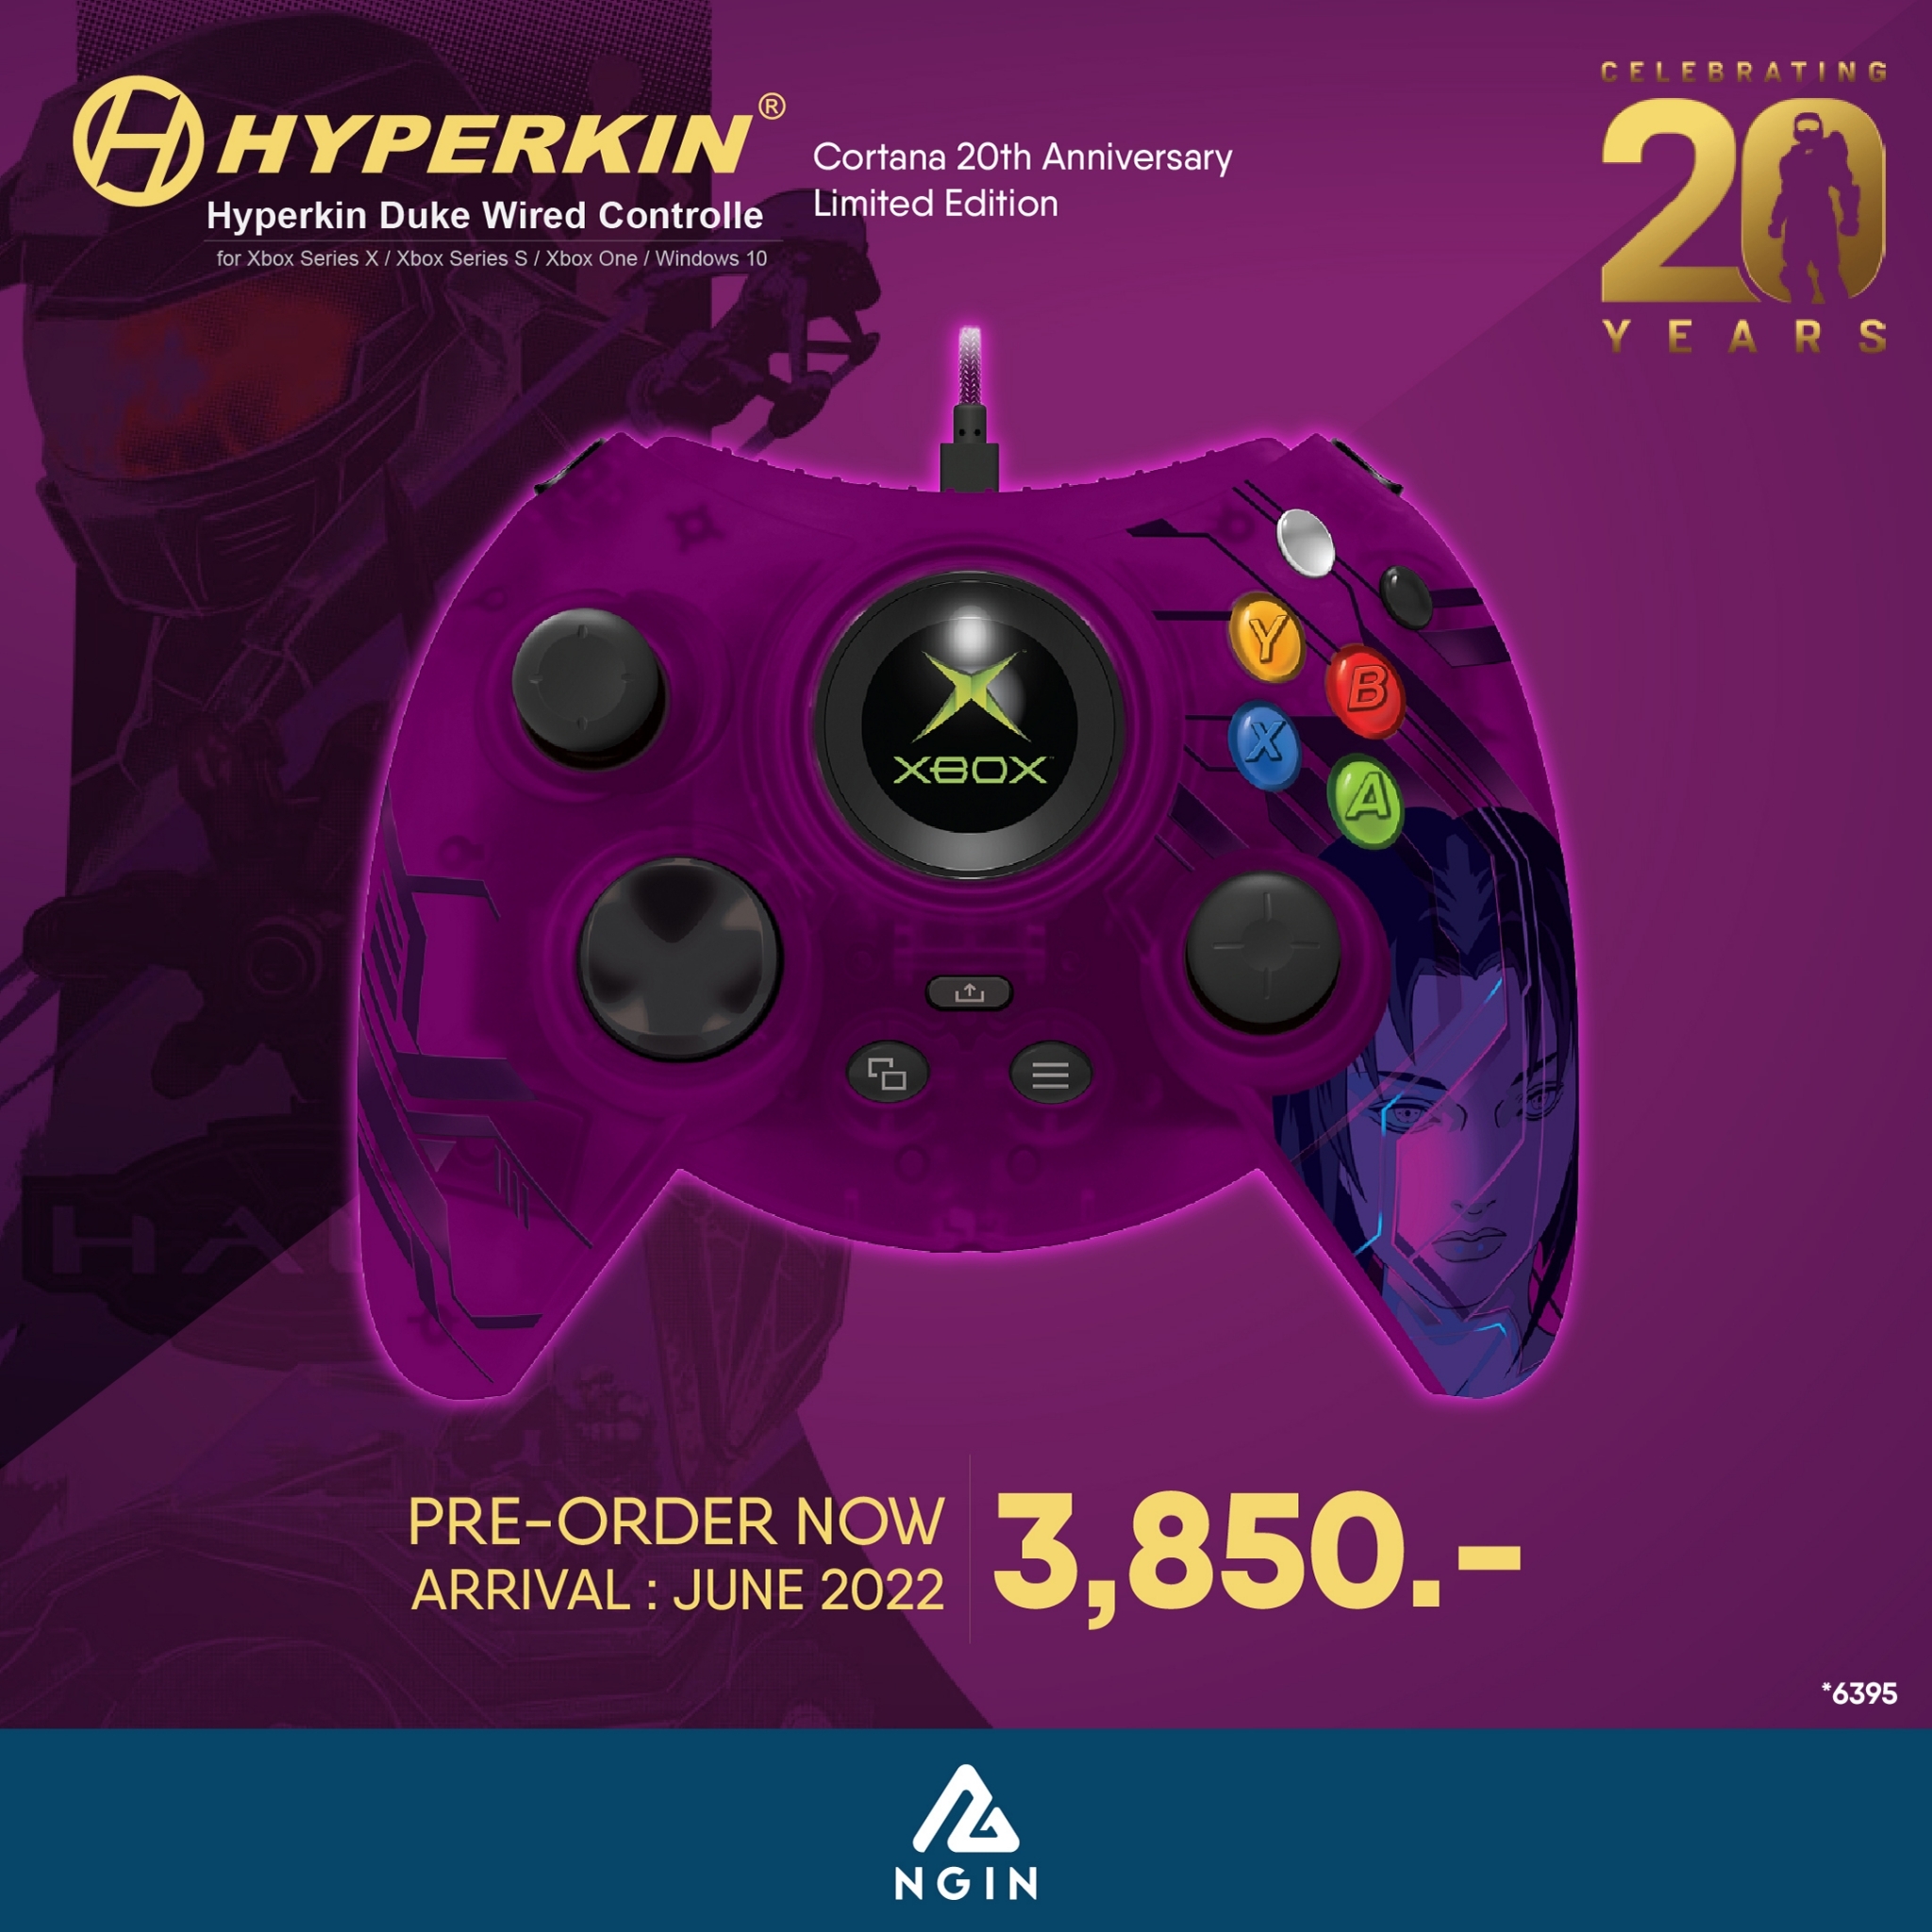 Hyperkin Duke Wired Controller for Xbox X|S/Xbox One/Windows  - (Cortana 20th Anniversary Limited Edition)